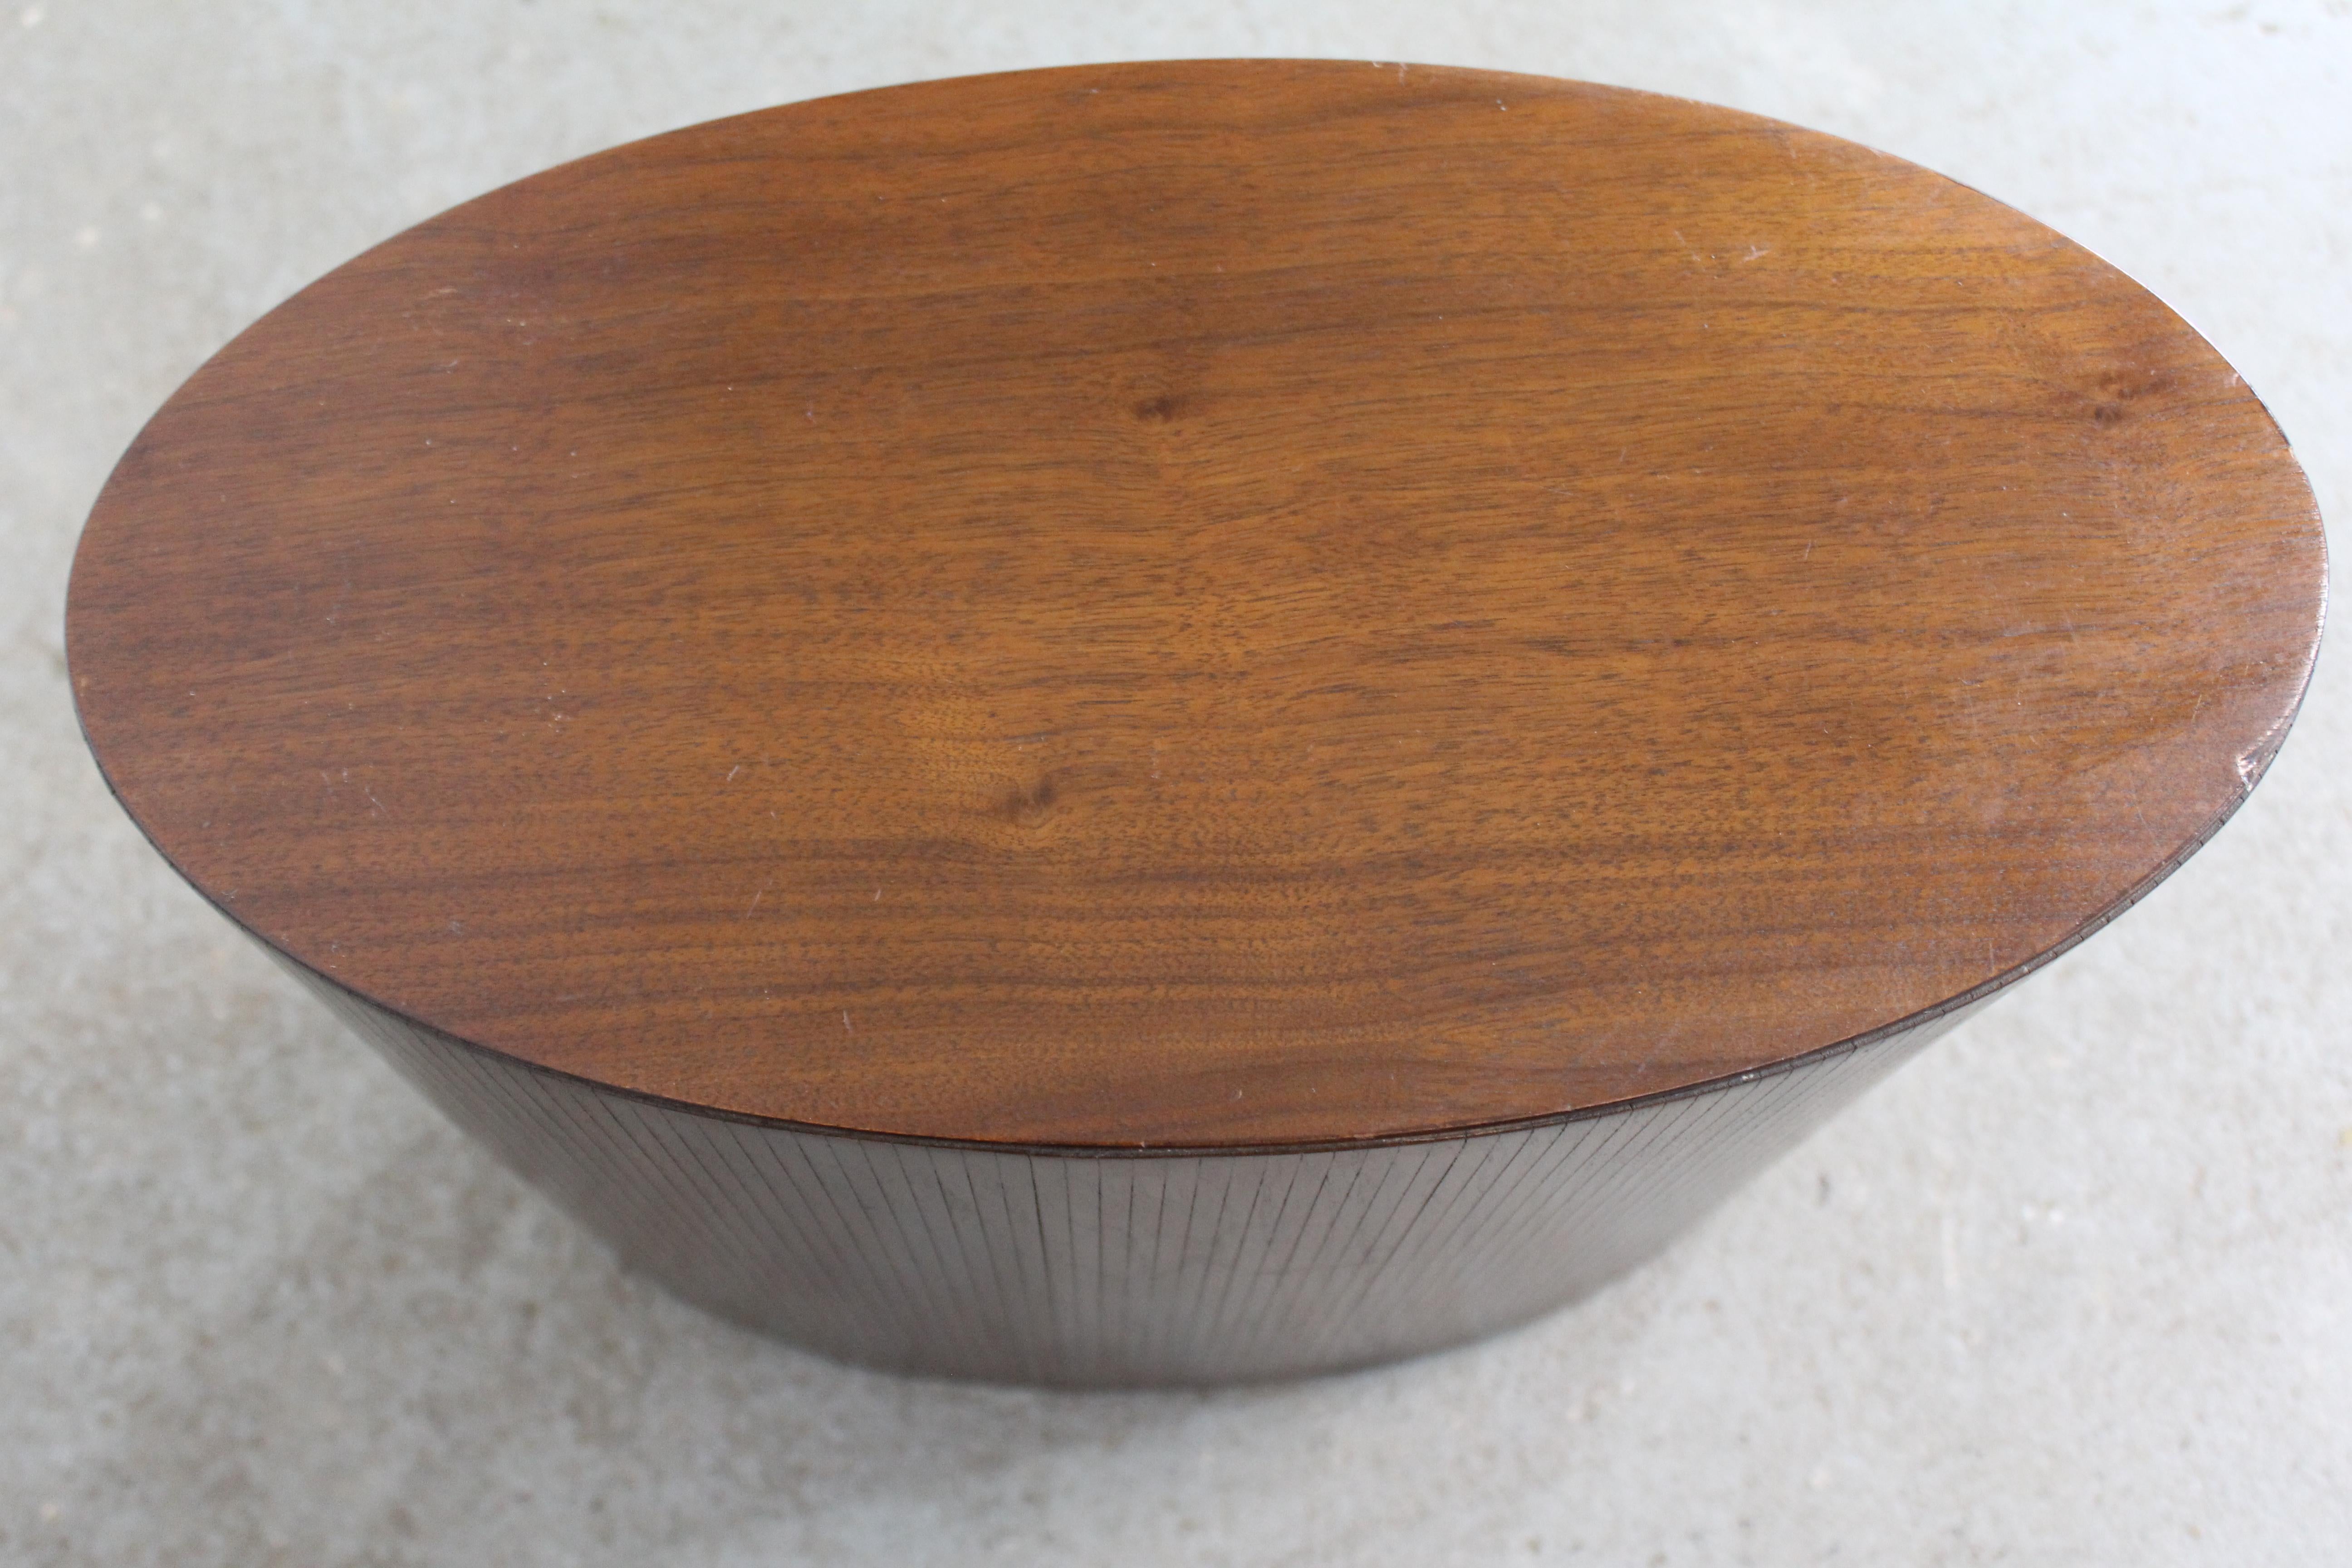 Pair of Mid-Century Modern Oval Walnut Pedestal/Stands/End Table by Lane For Sale 2